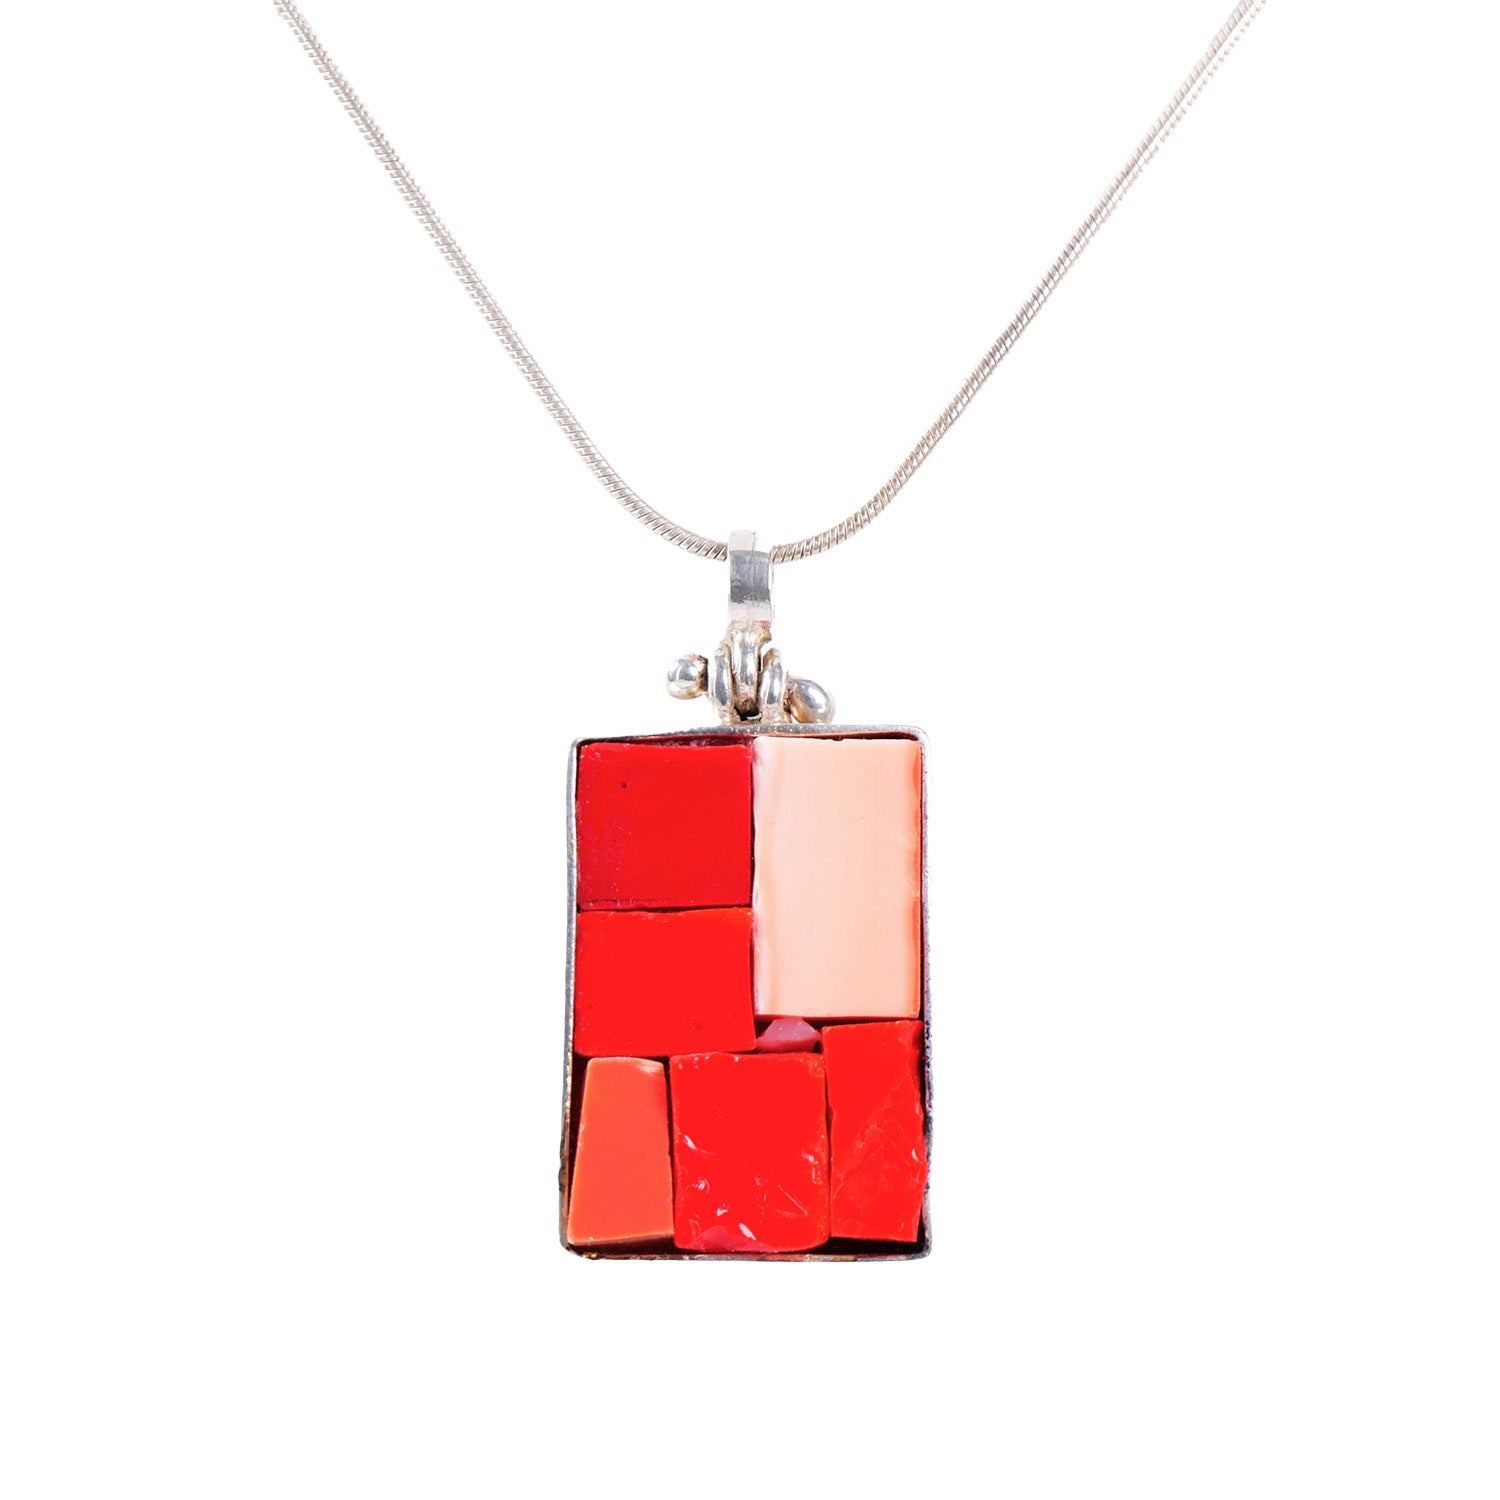 NILAJA [ニラジャ] / rectangle glass necklace [レクタングルグラスネックレス] (red)